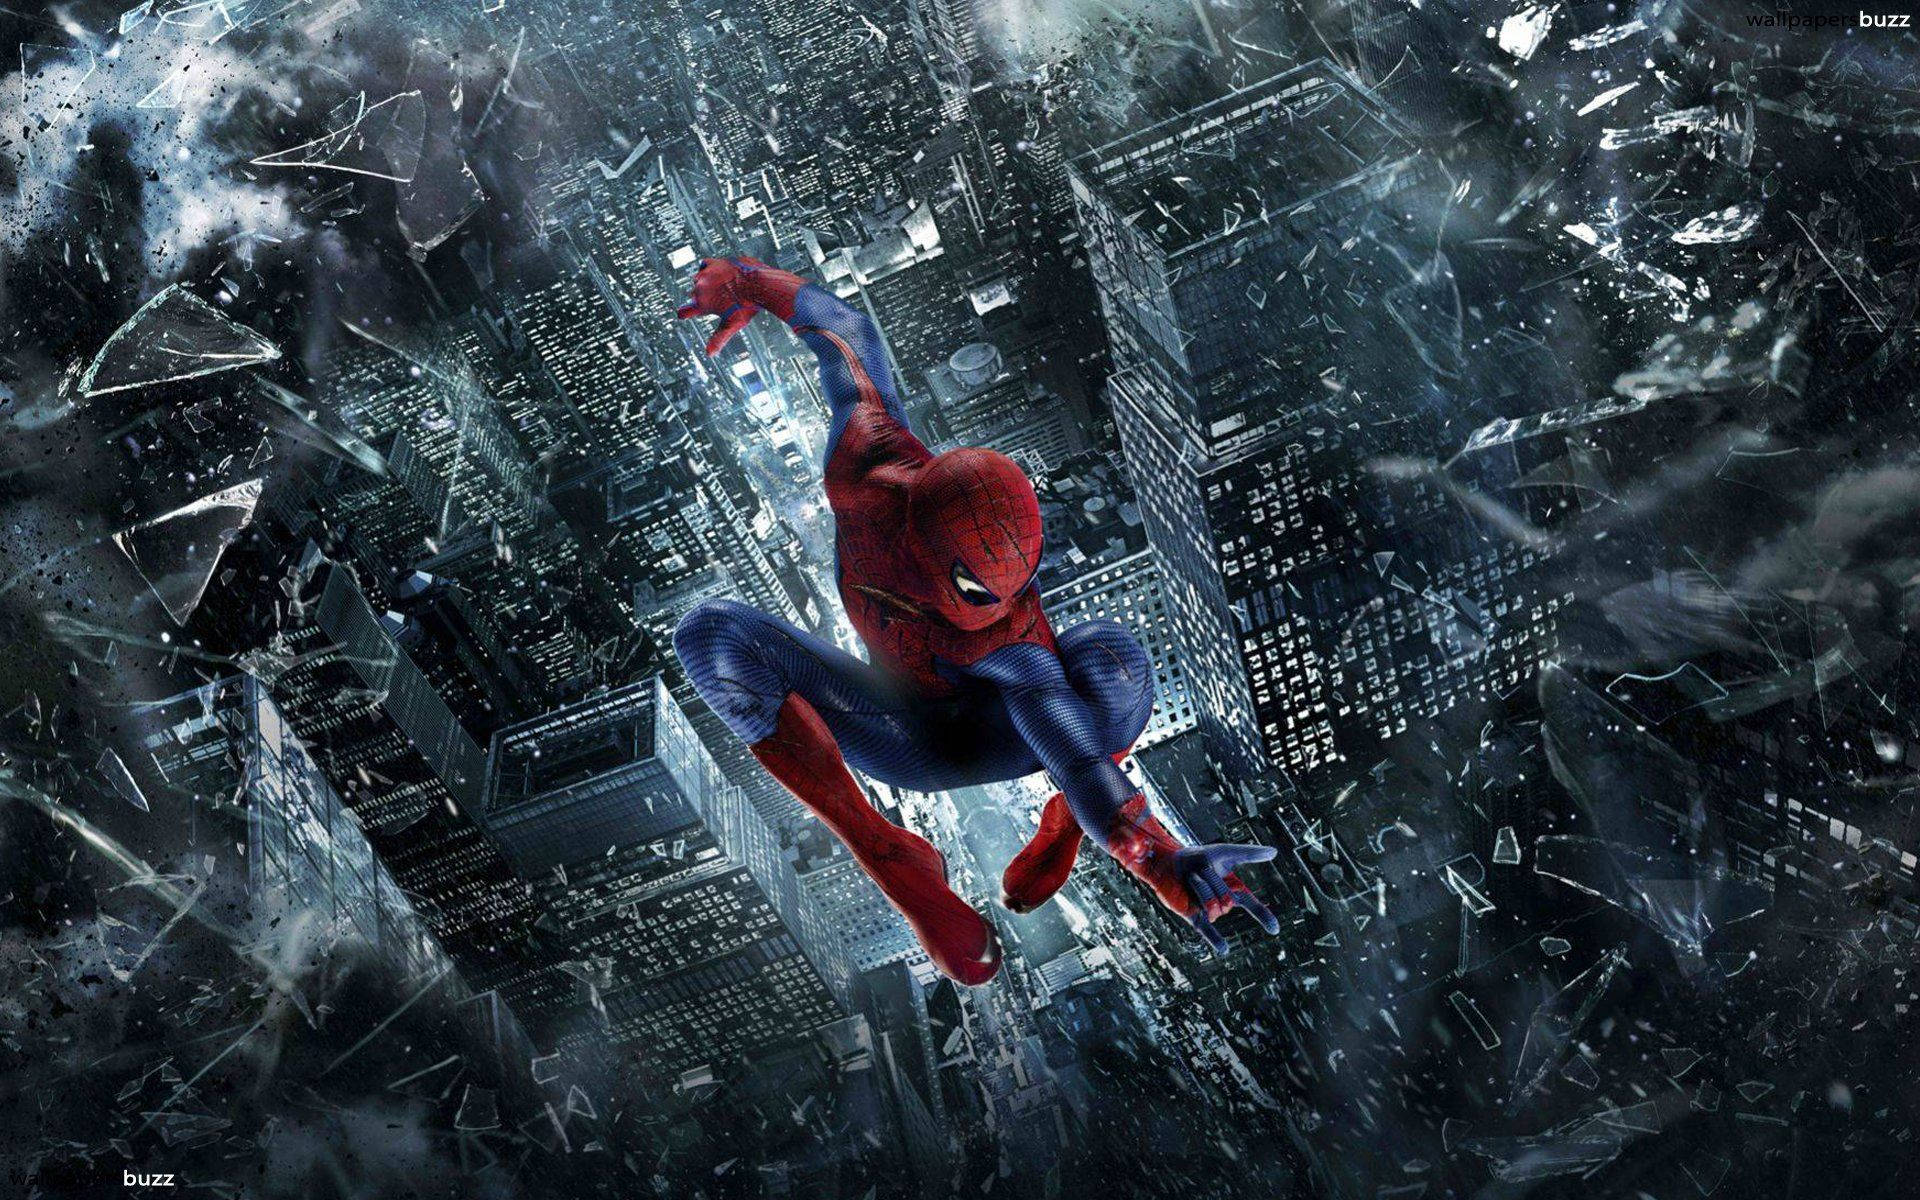 Spiderman in action with broken glass in the background of city at night.